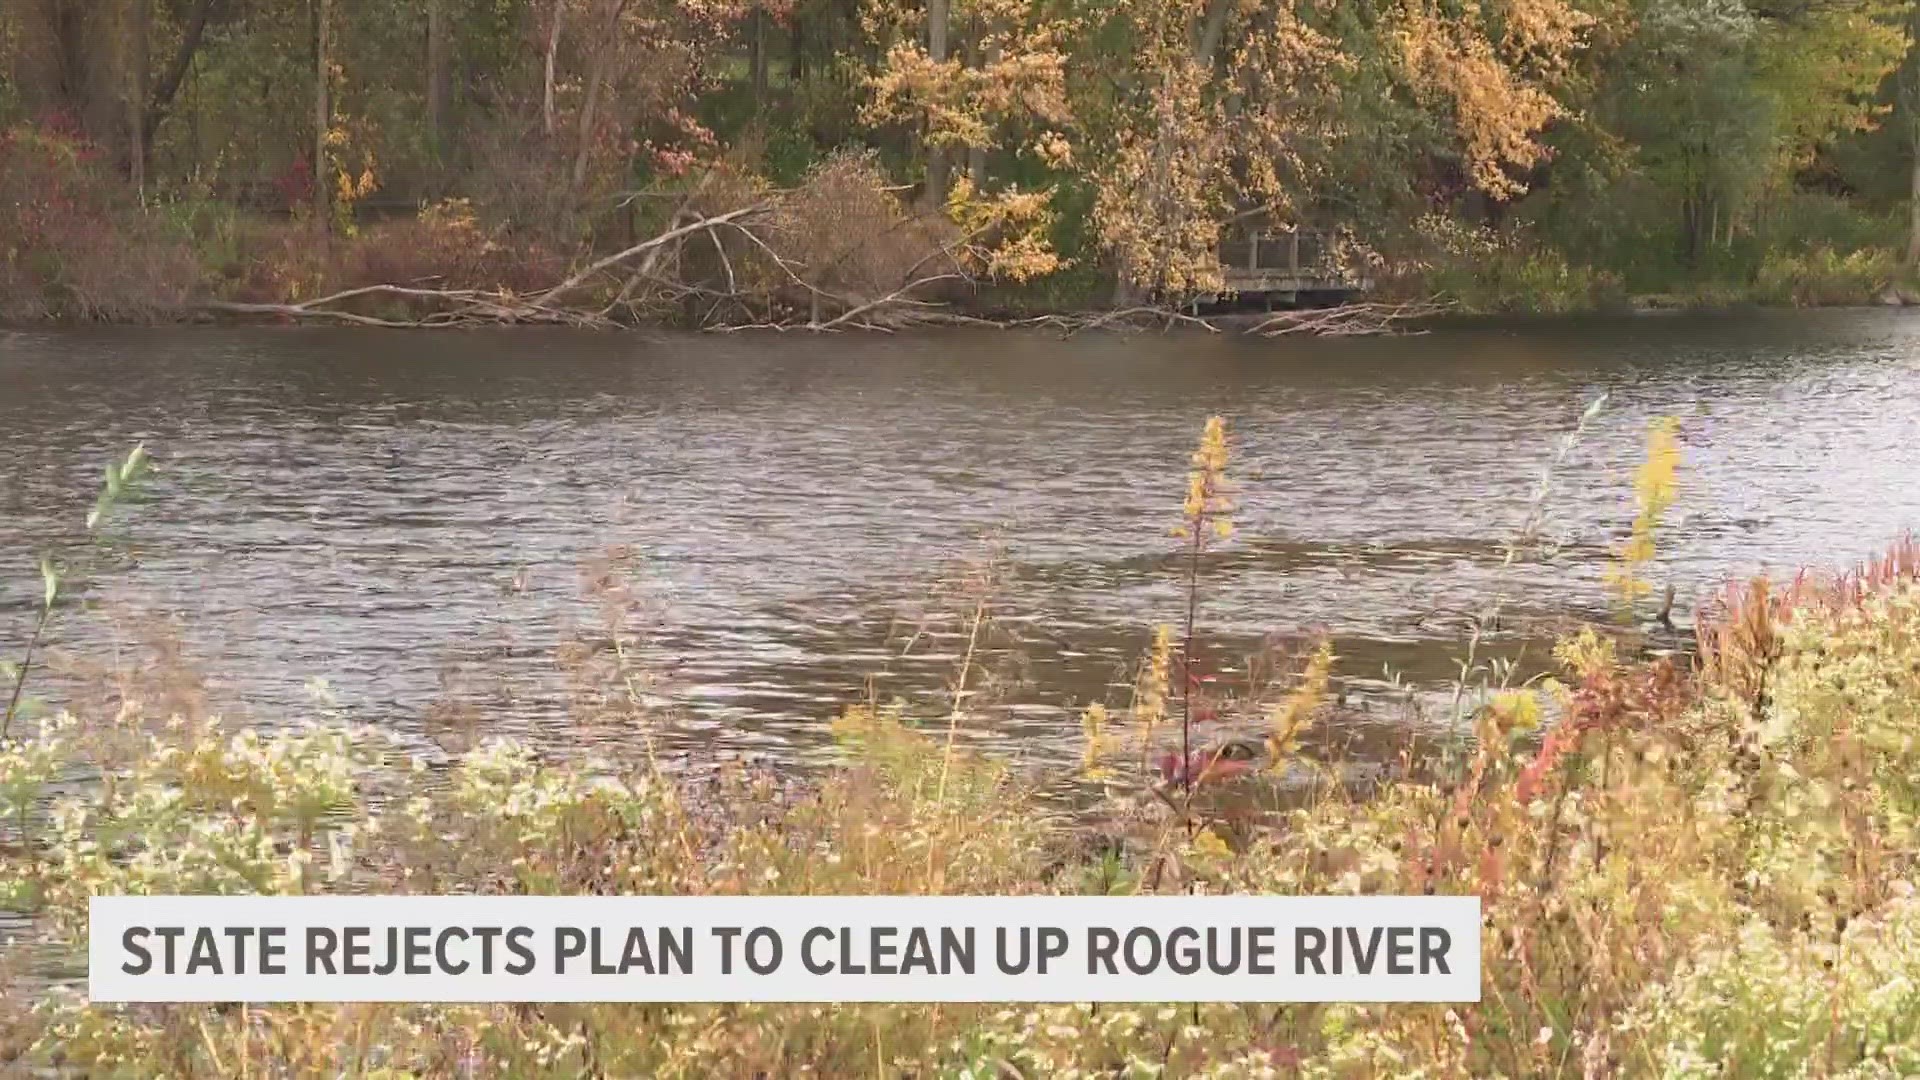 Wolverine Worldwide has until May 9 to re-submit its cleanup plan to EGLE.